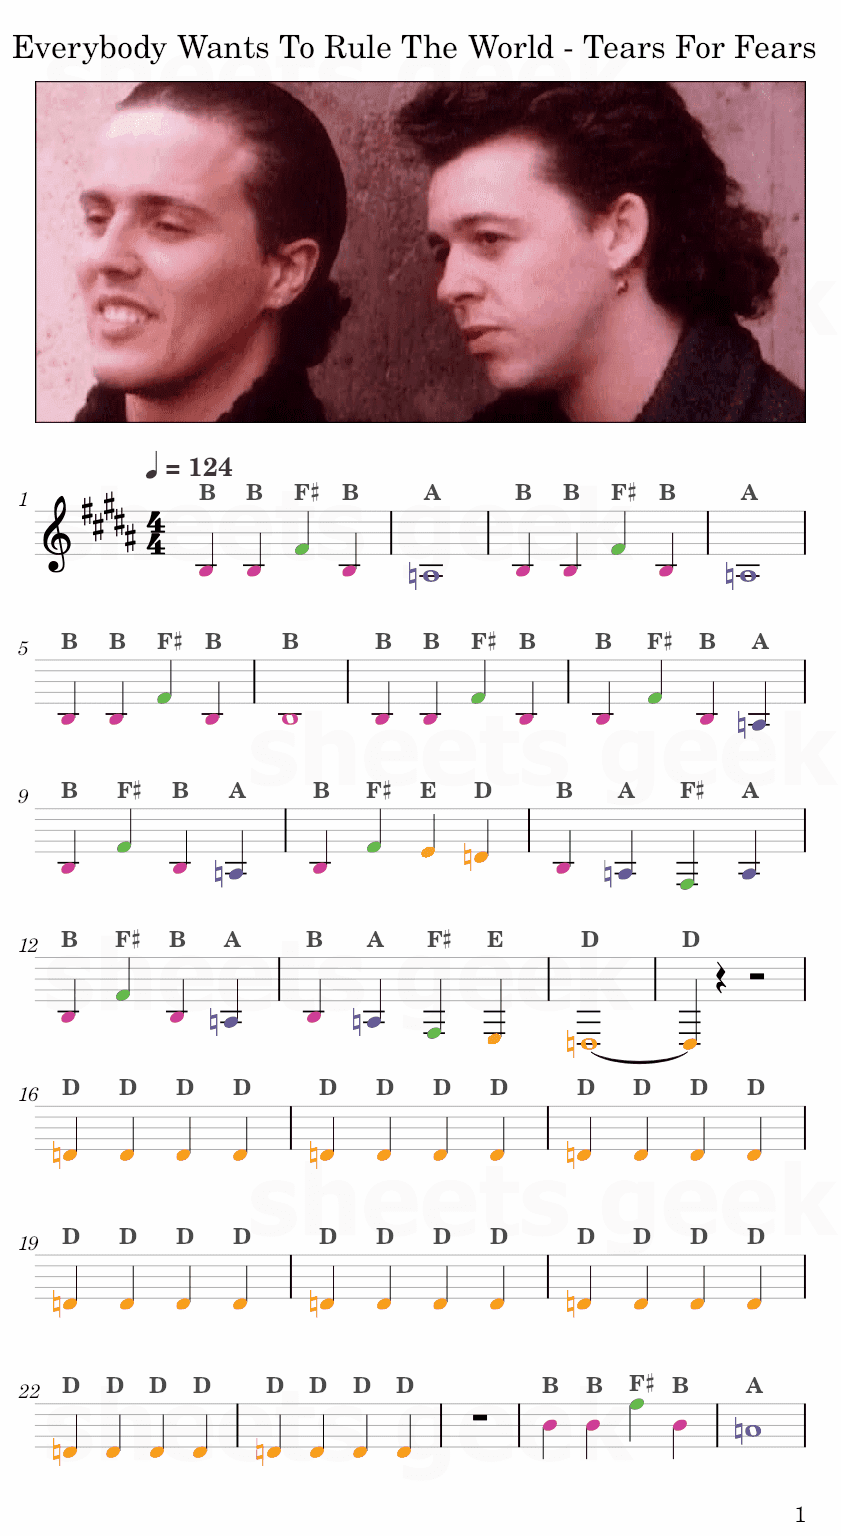 Everybody Wants To Rule The World - Tears For Fears Easy Sheet Music Free for piano, keyboard, flute, violin, sax, cello page 1